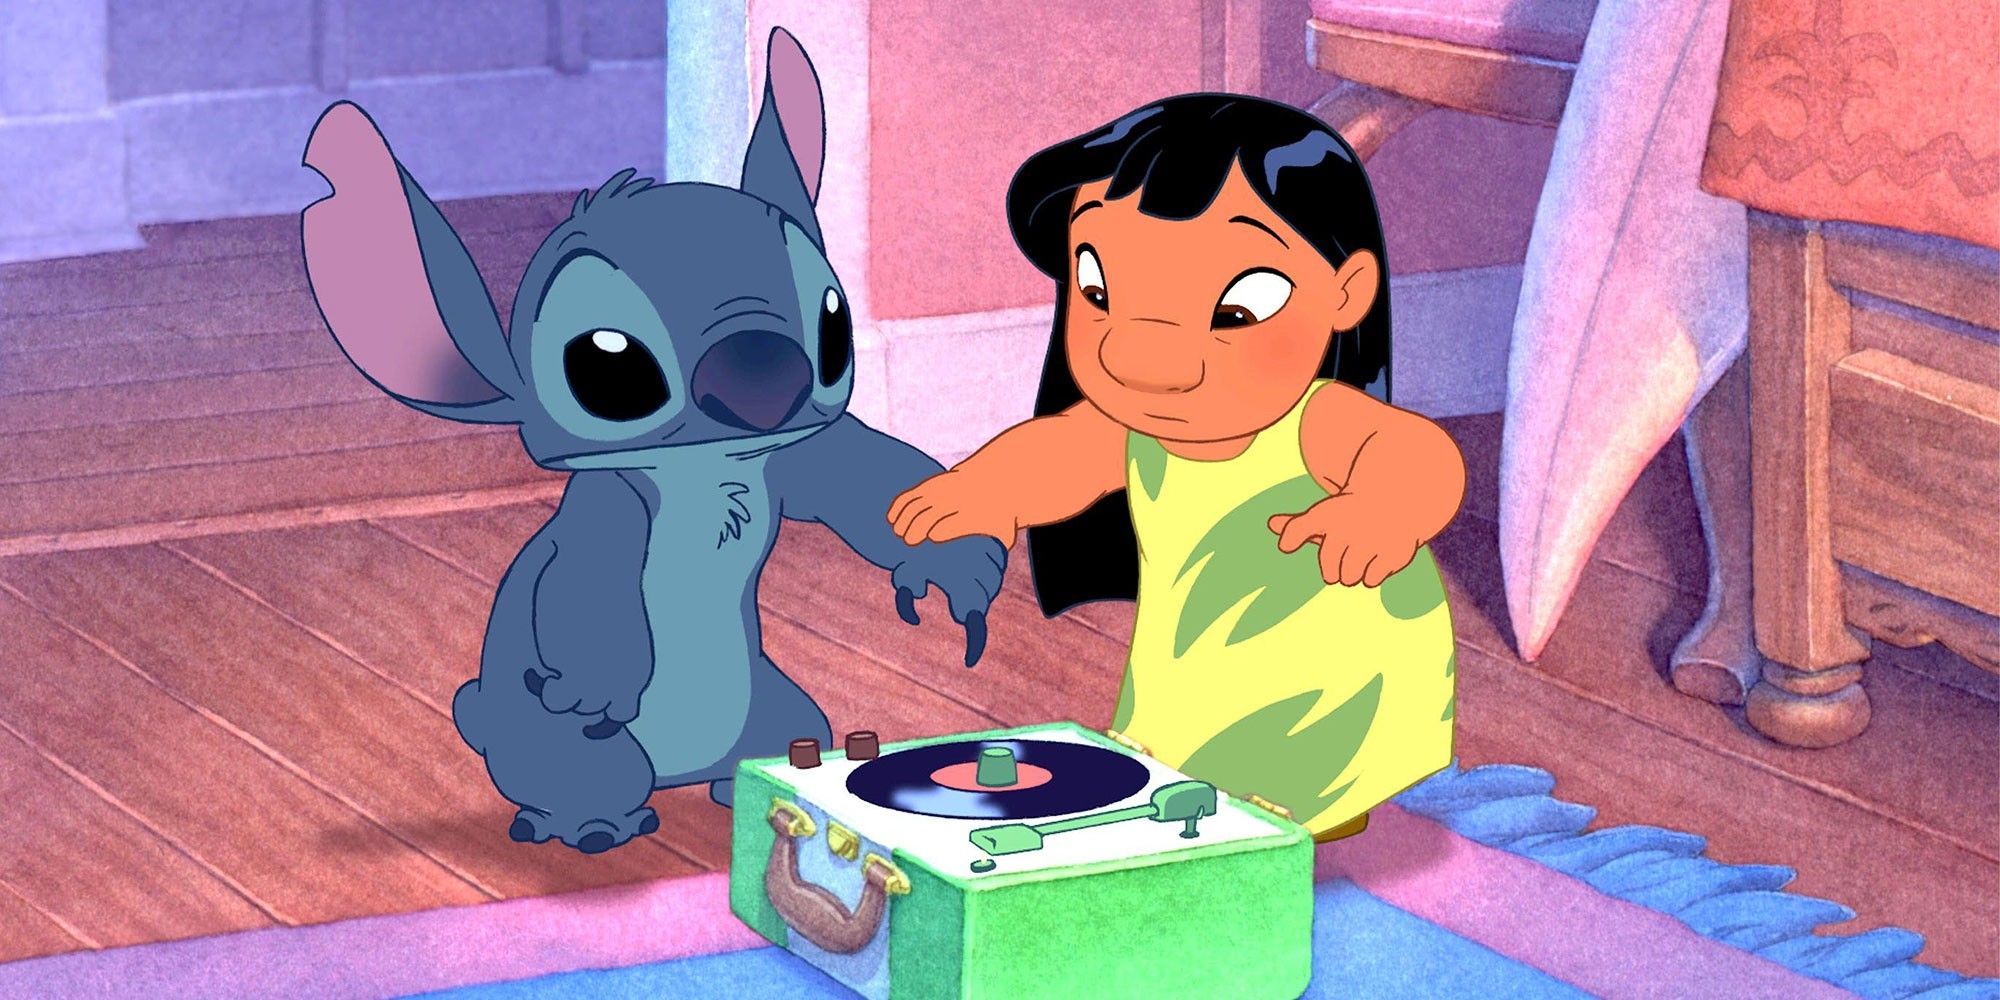 Lilo and Stitch play with a record player